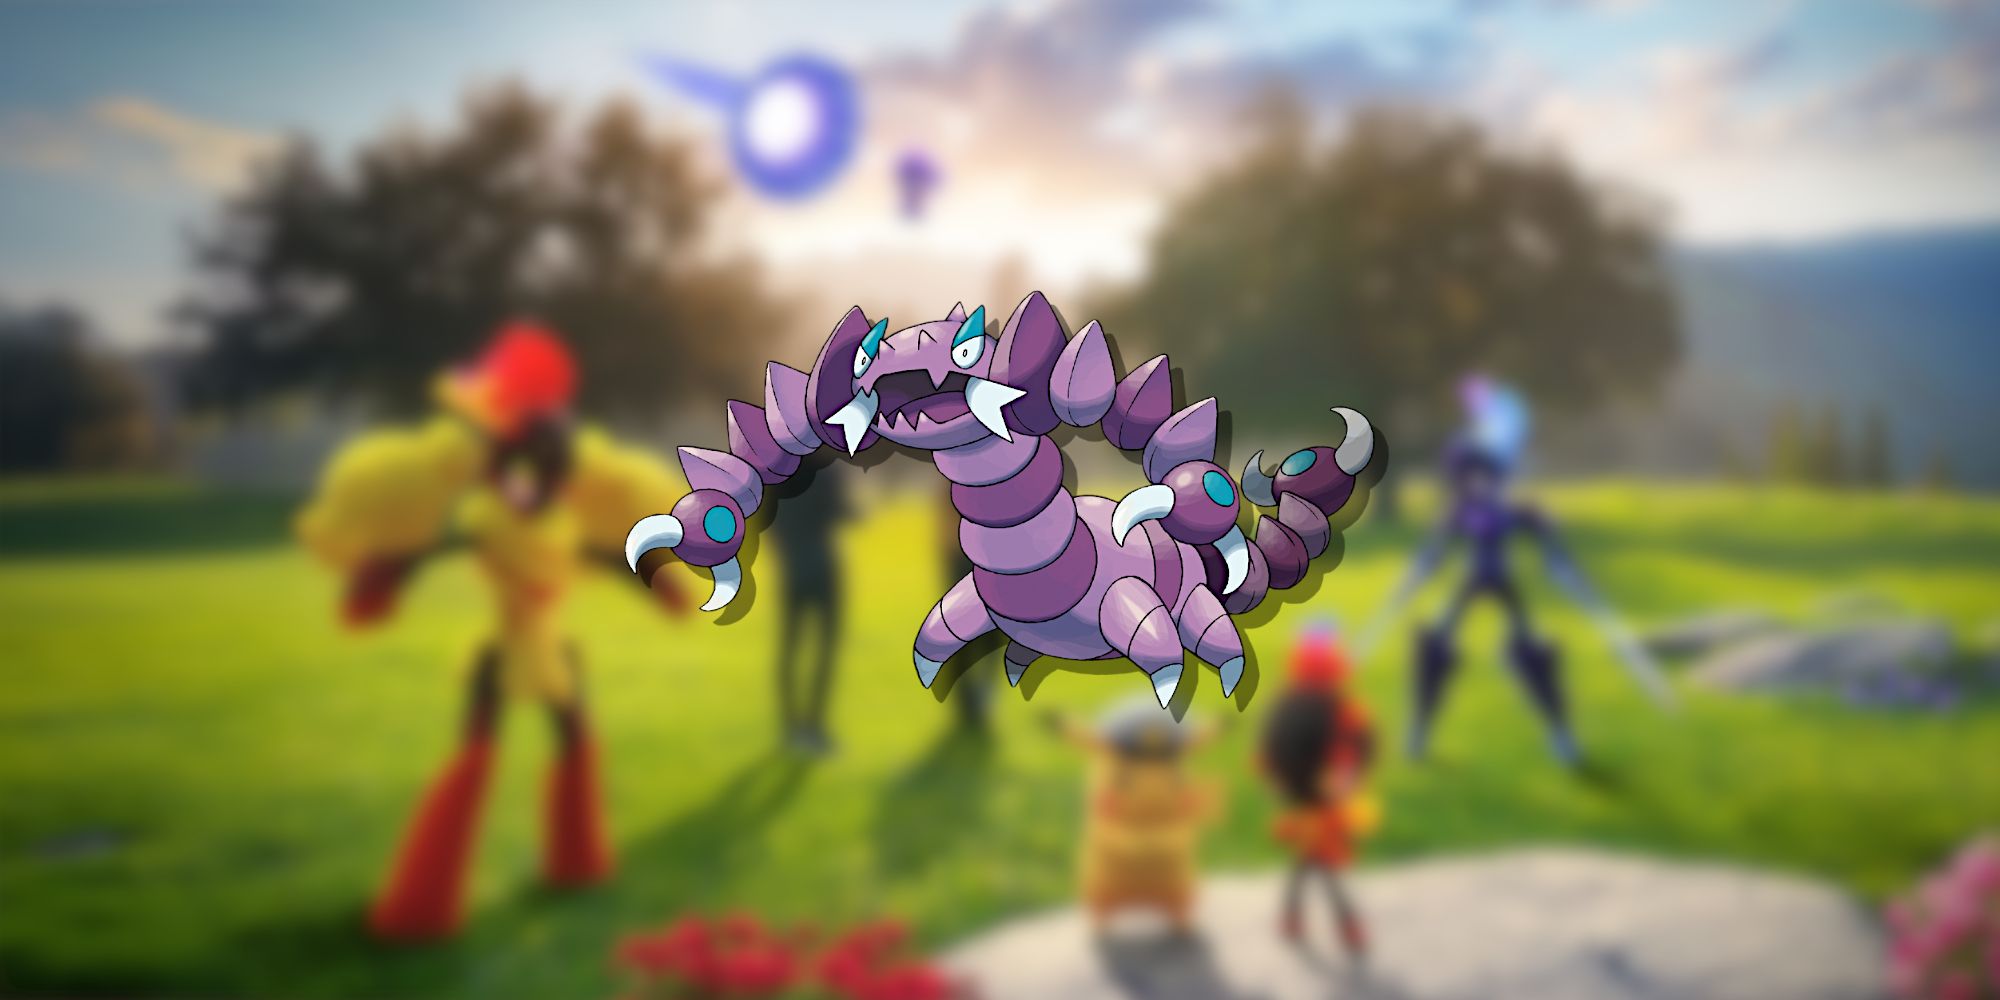 Image of the Pokemon Drapion in the foreground from Pokemon GO